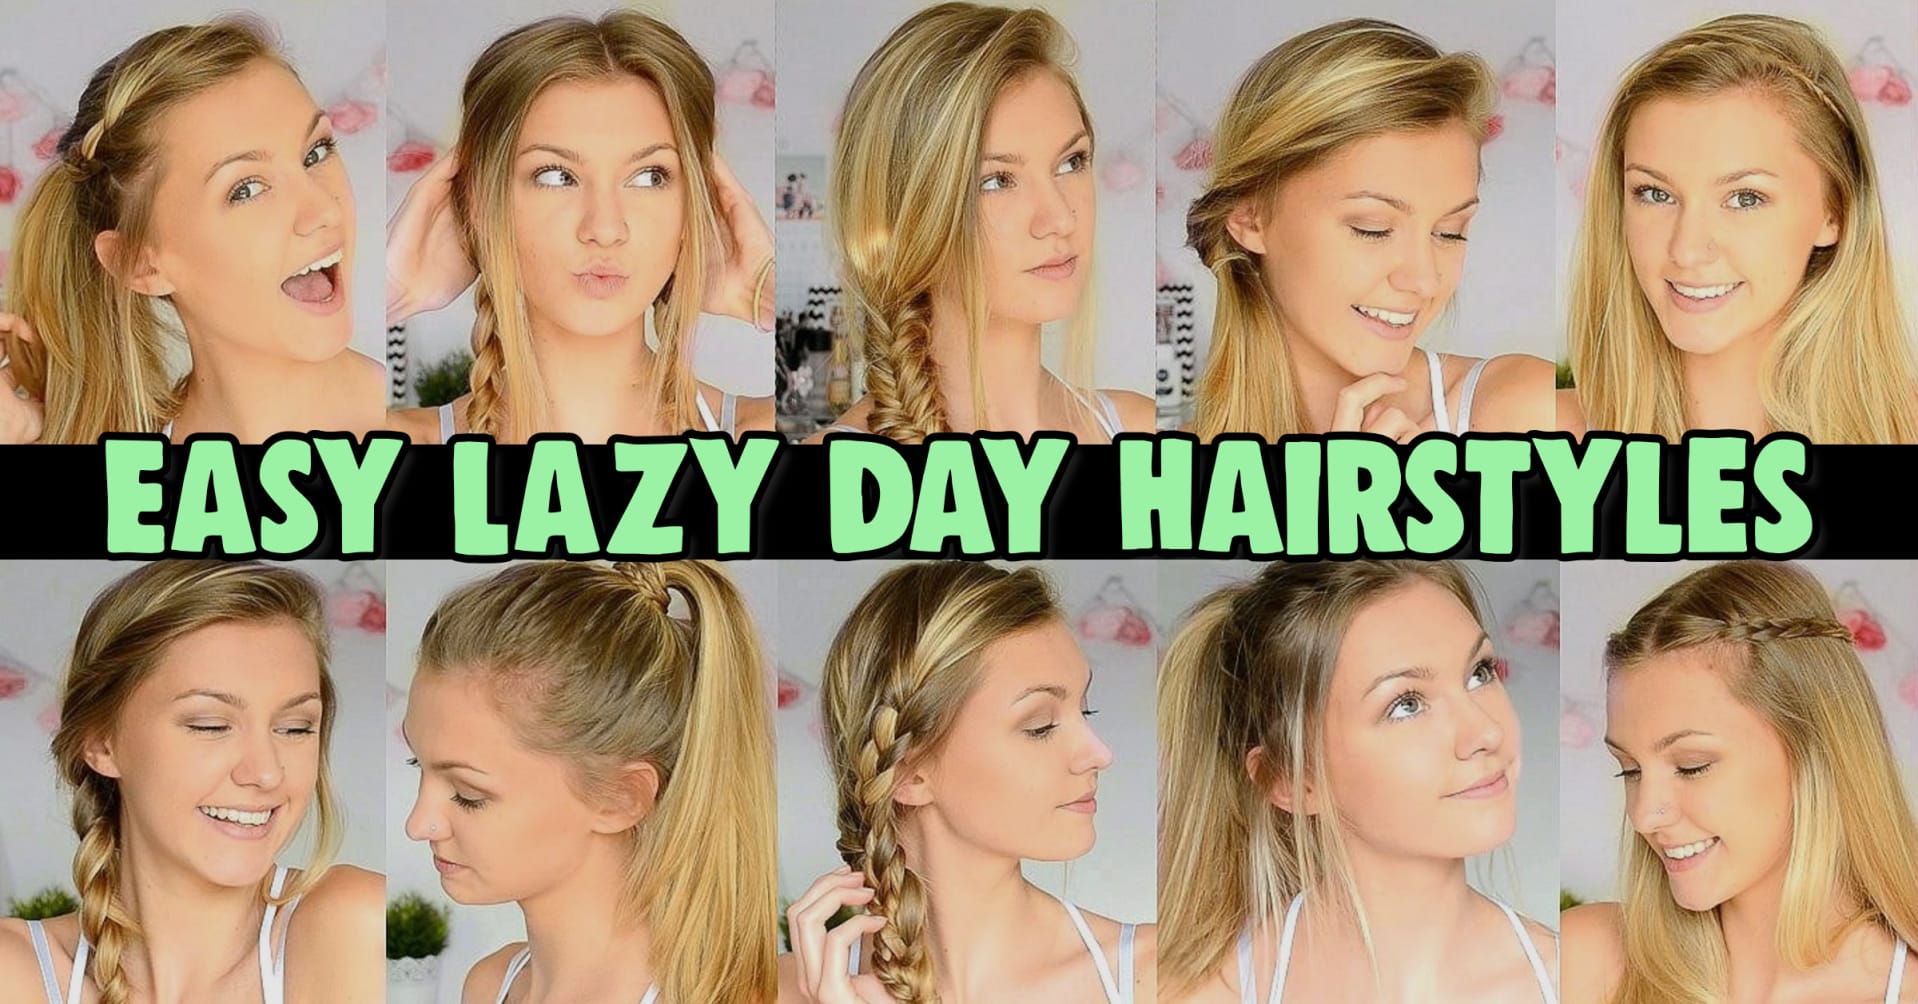 Lazy hairstyles - easy lazy day hairstyle ideas for running late day or those lazy girl lazy days